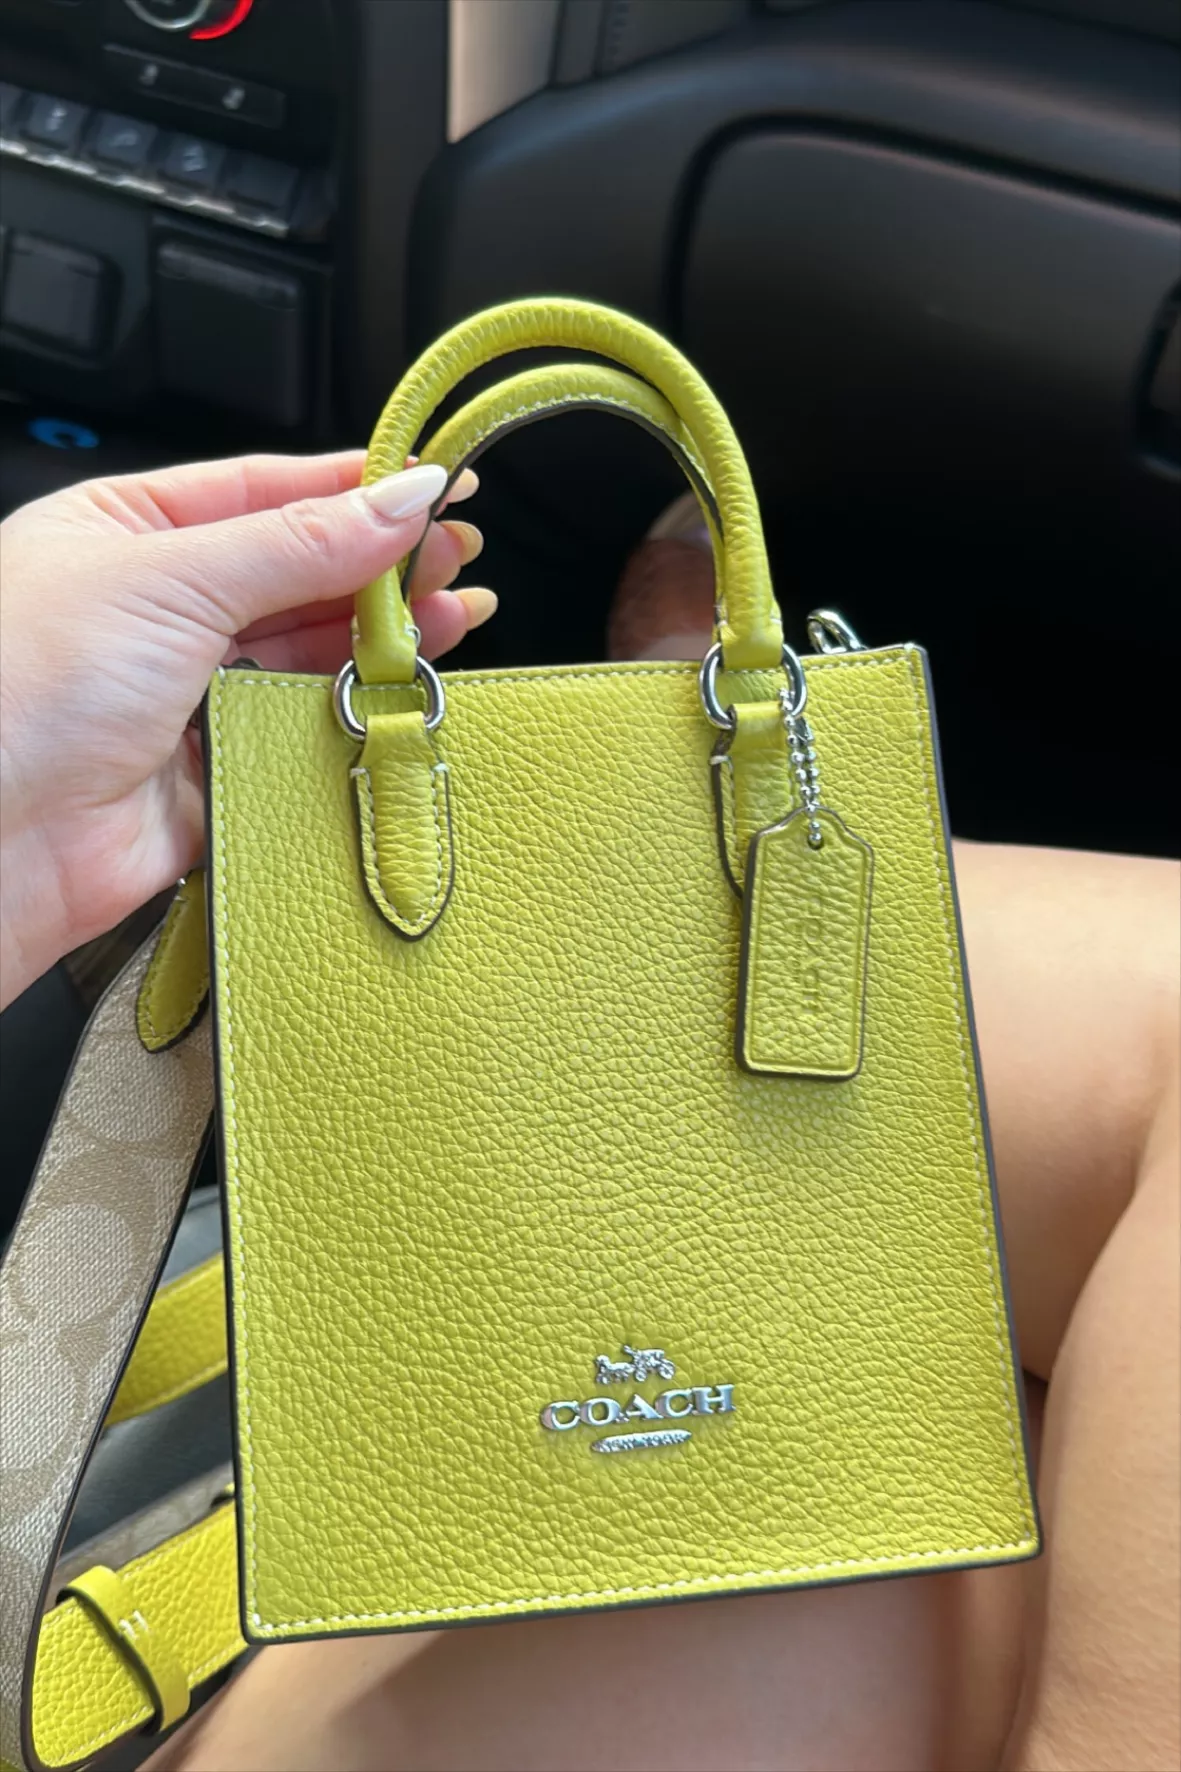 Coach Outlet North South Mini Tote Bag Review With Photos